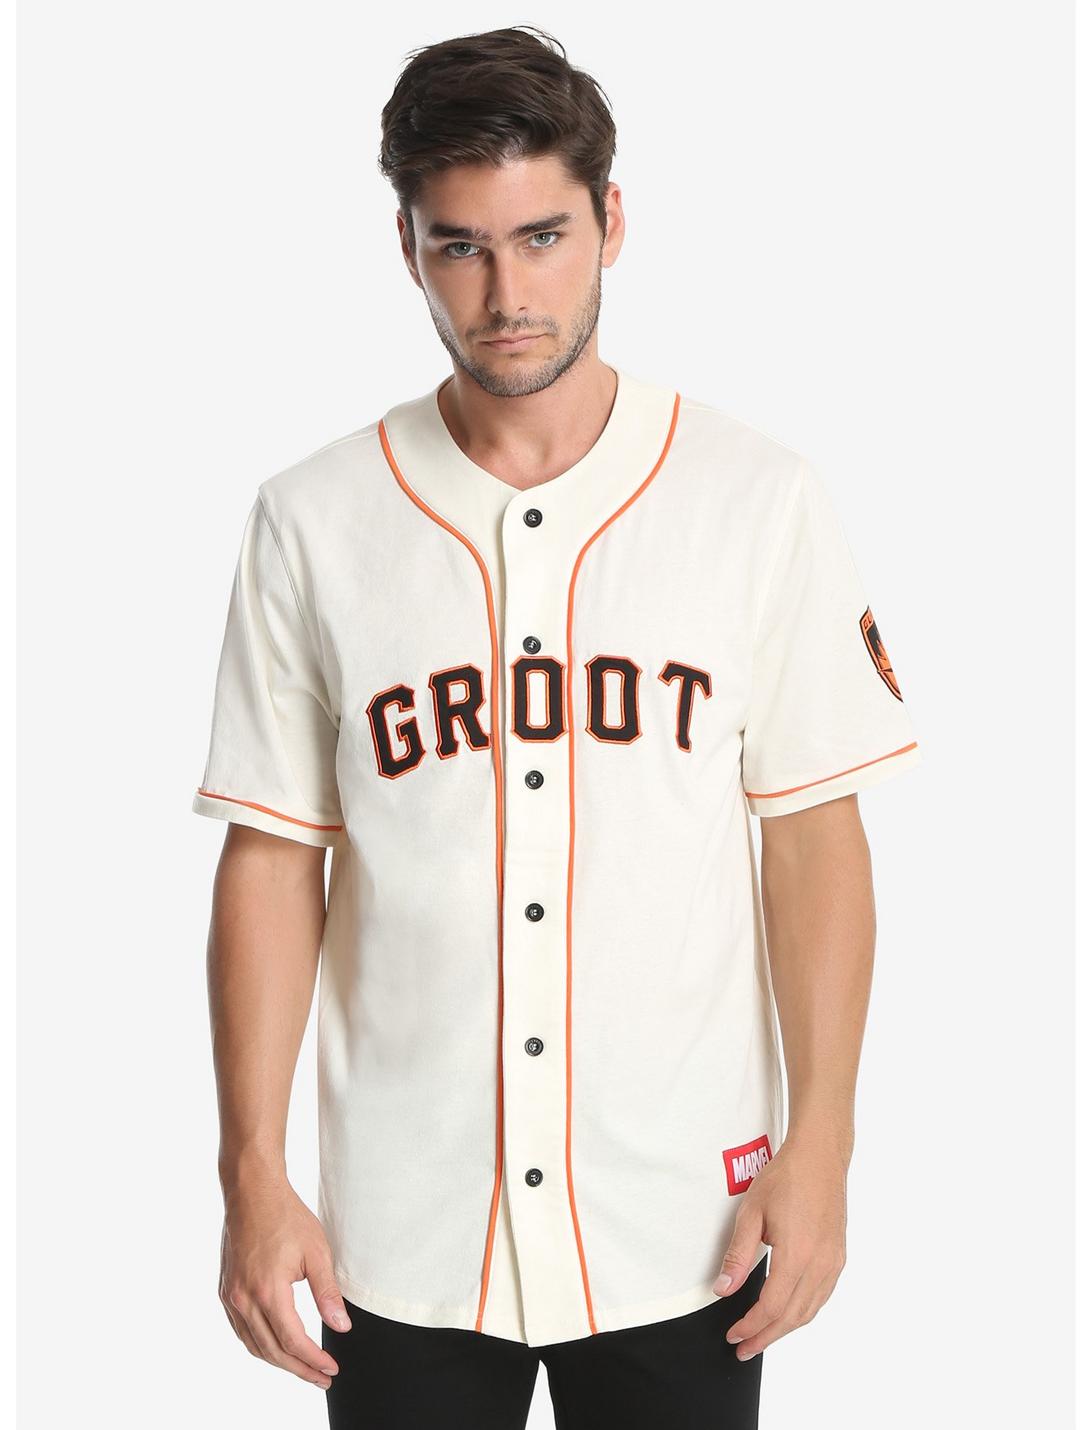 Marvel Guardians Of The Galaxy Groot Baseball Jersey - BoxLunch Exclusive, WHITE, hi-res